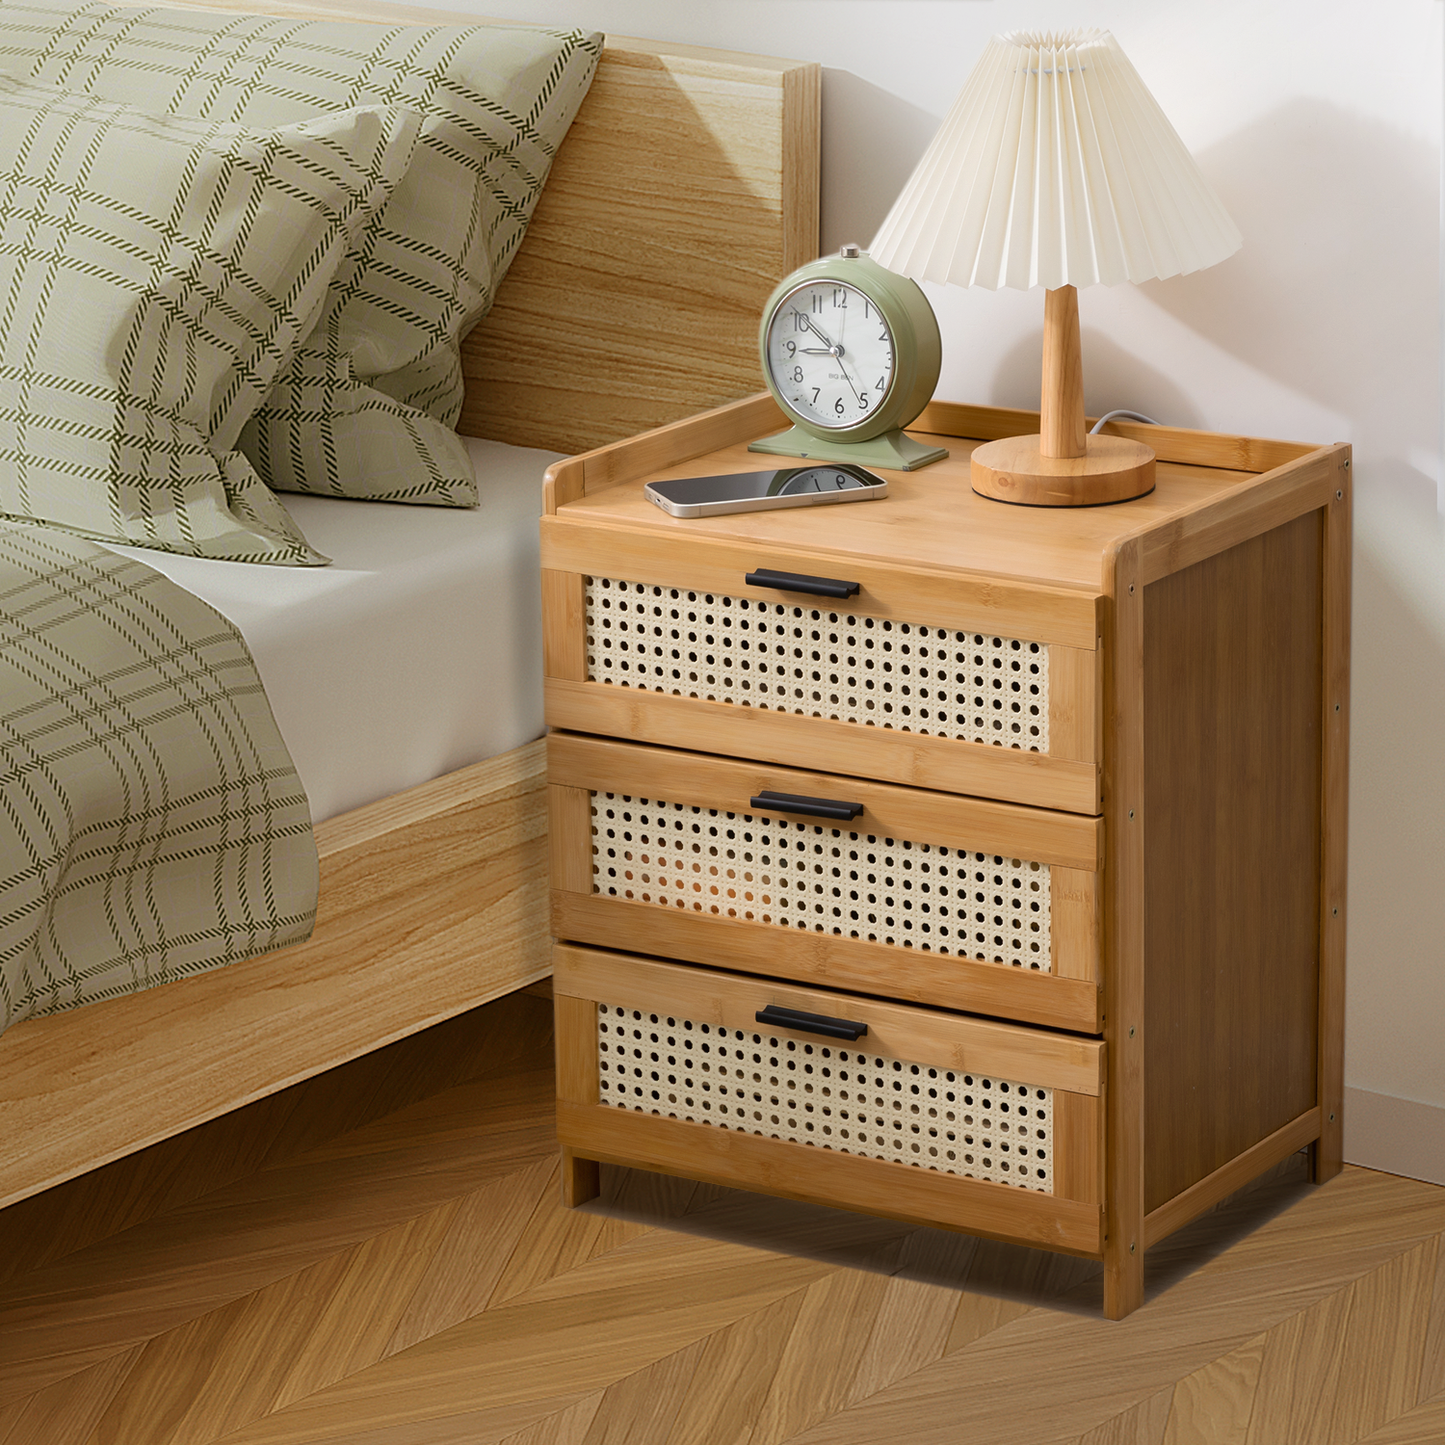 17" Bedside Table / Nightstand - 3 drawers - Natural